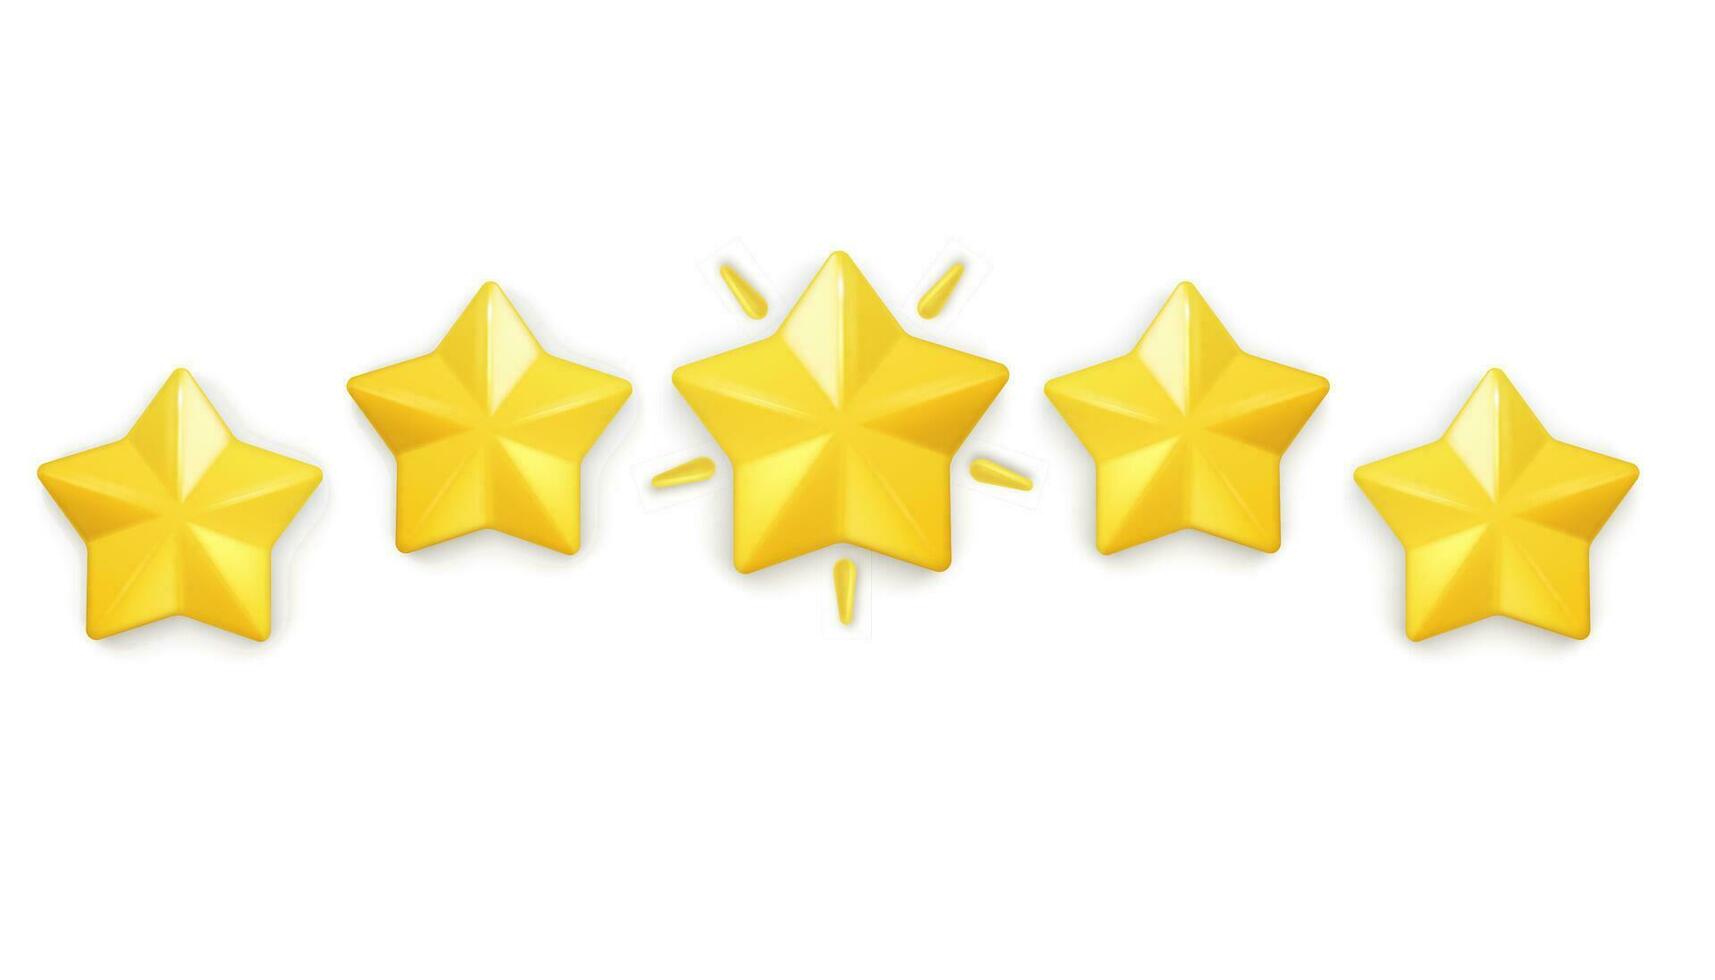 Five glossy yellow stars symbolize gaming achievements, reflecting customer feedback on website employees. Realistic 3D design tailored for mobile applications. Vector illustration